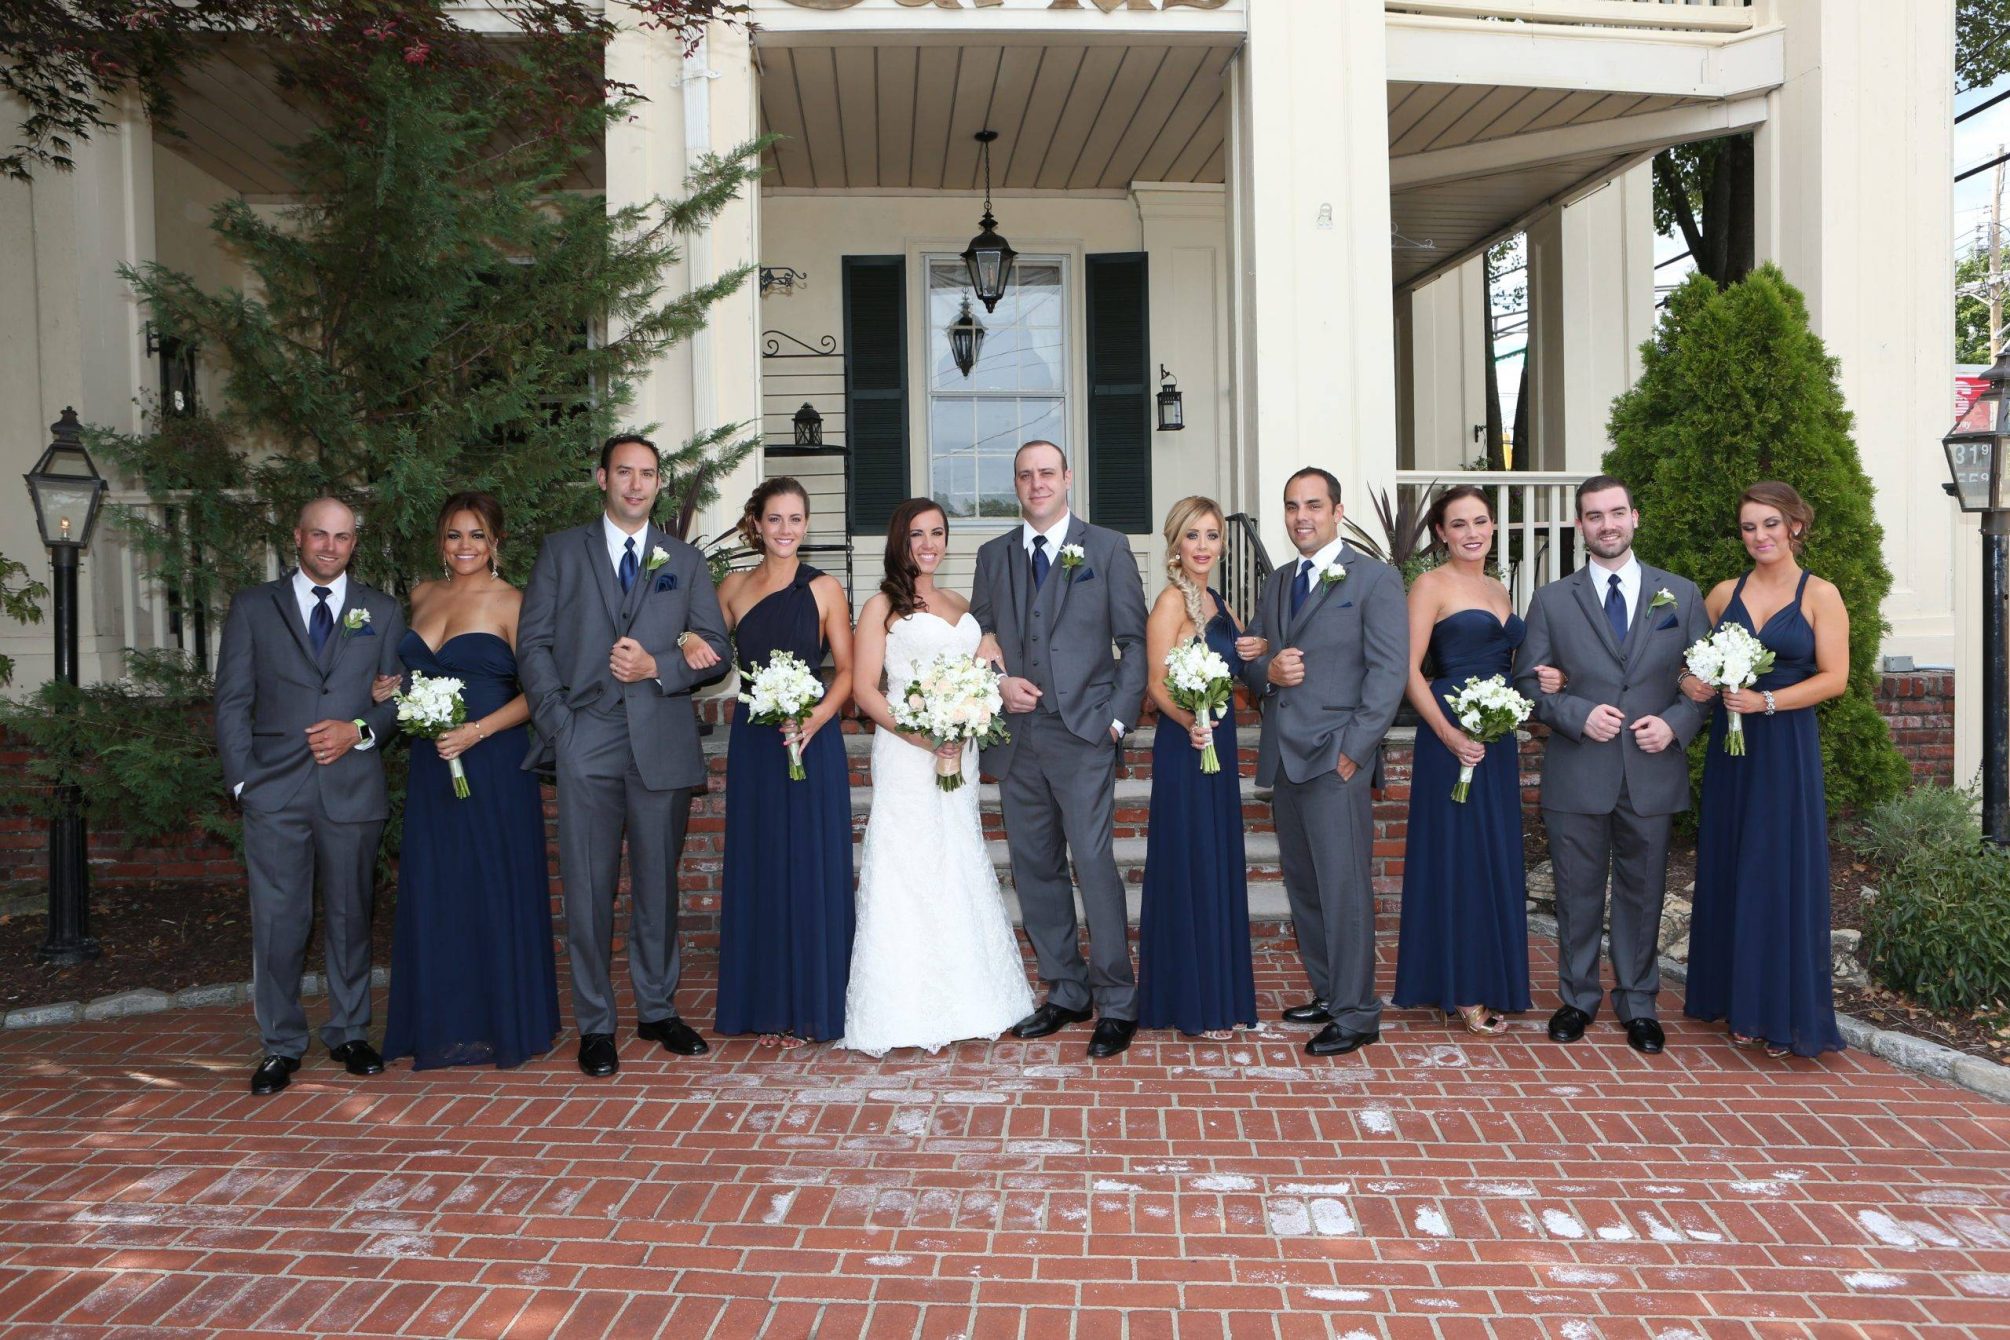 David’s Country Inn bridal party outside